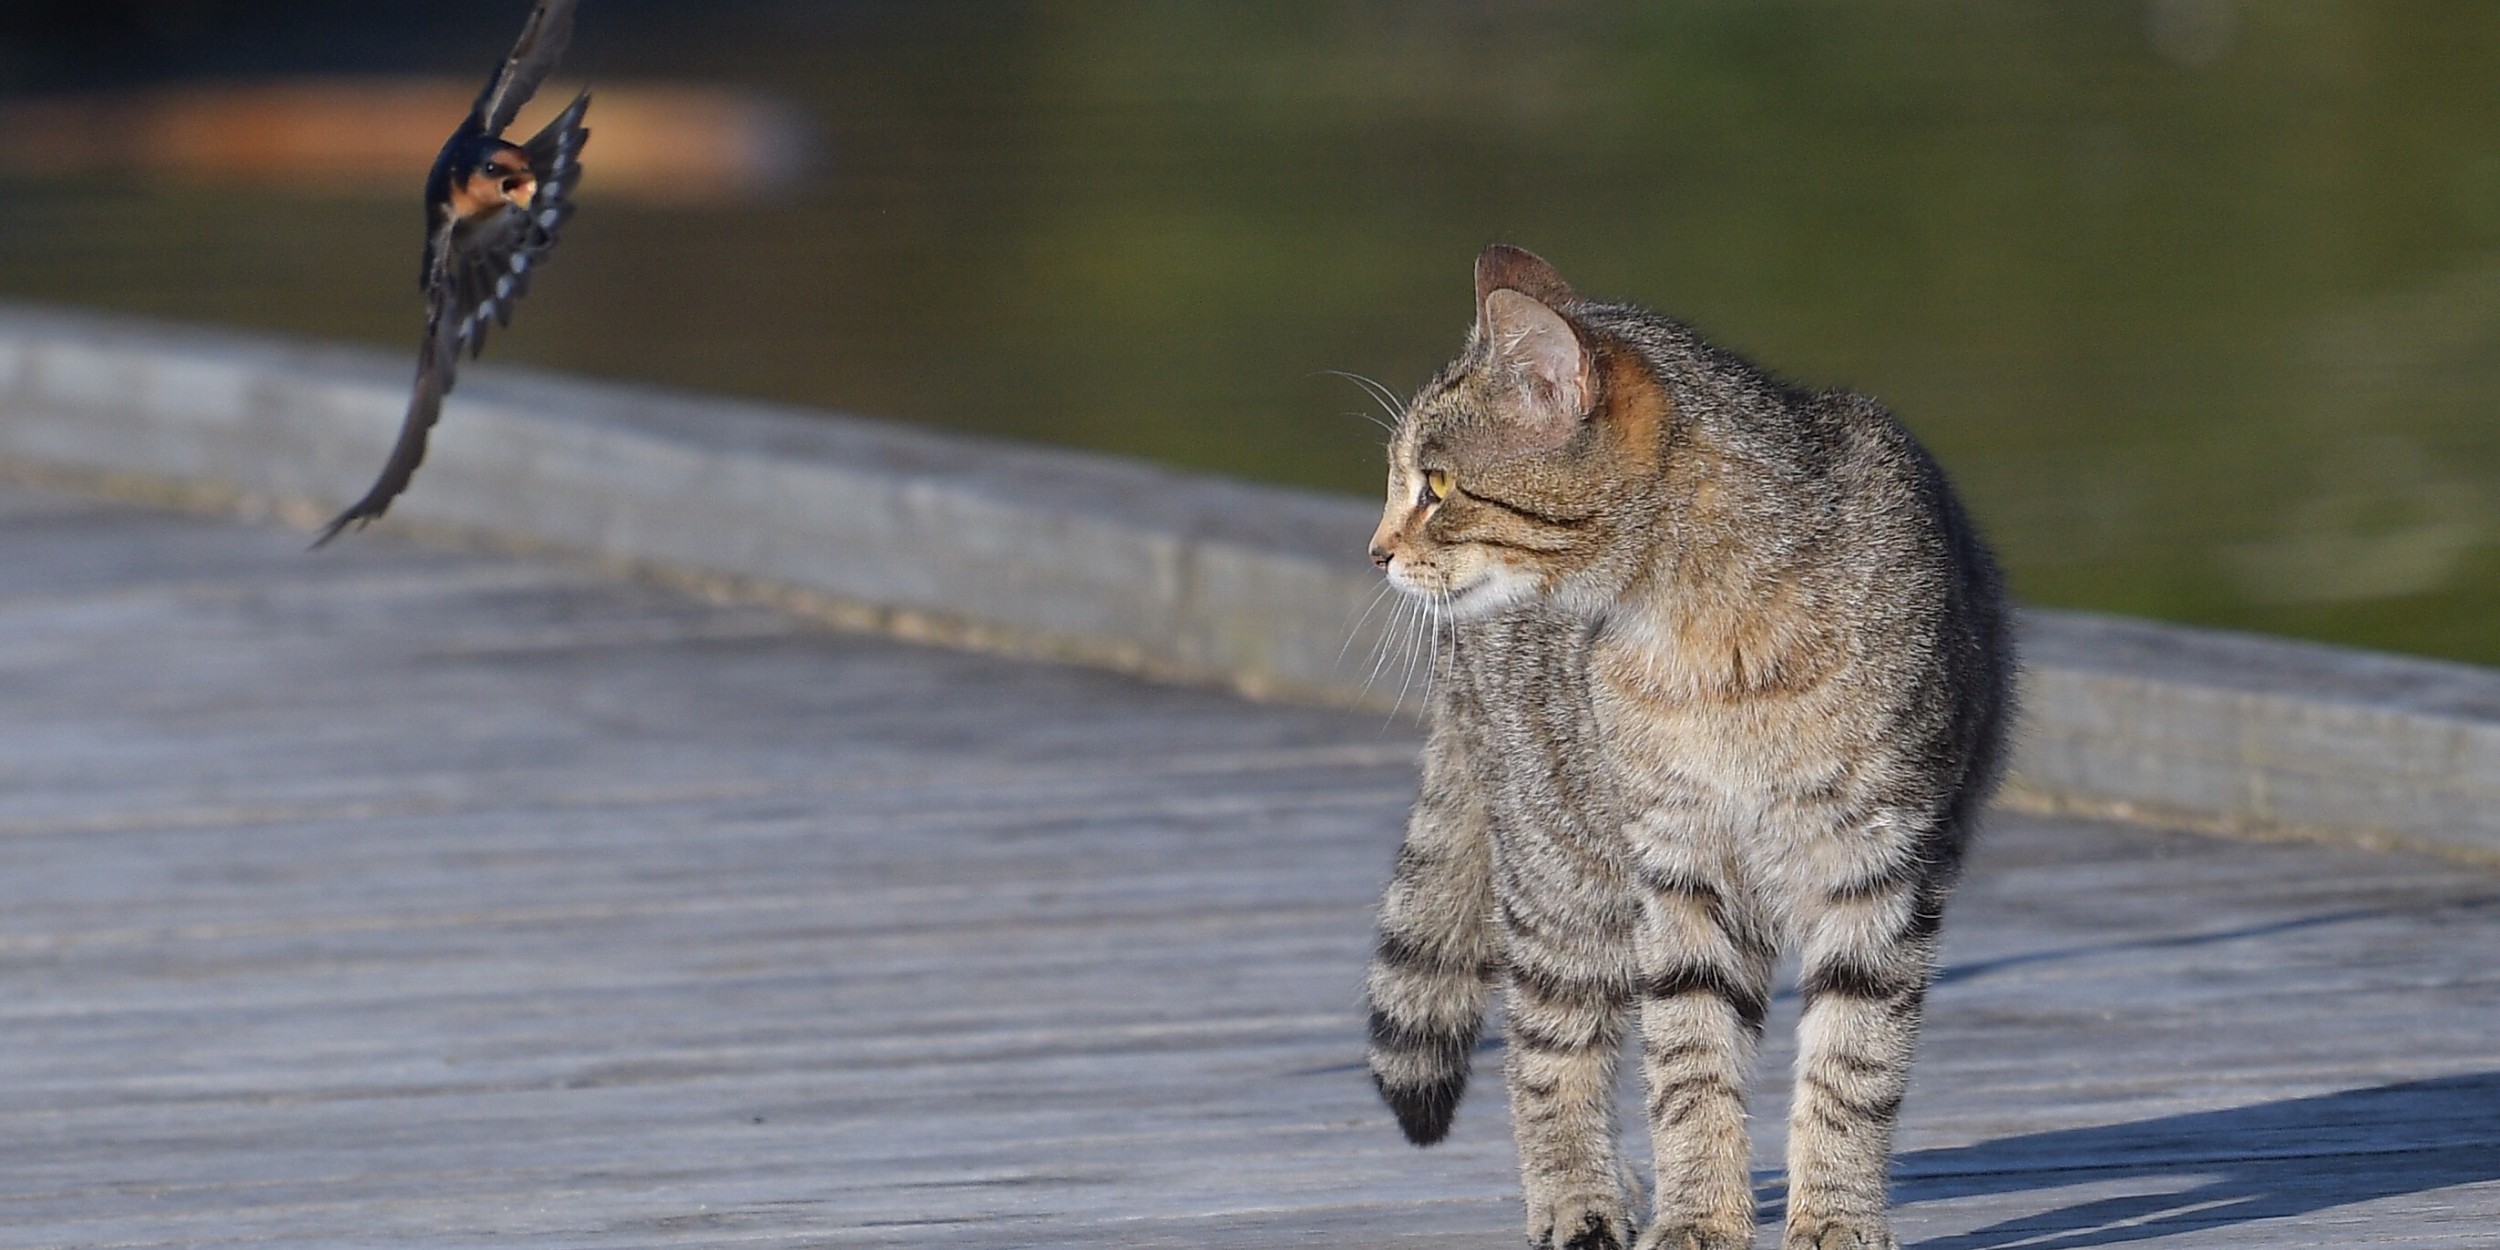 New Zealand, eliminate cats: They kill endangered bird species and